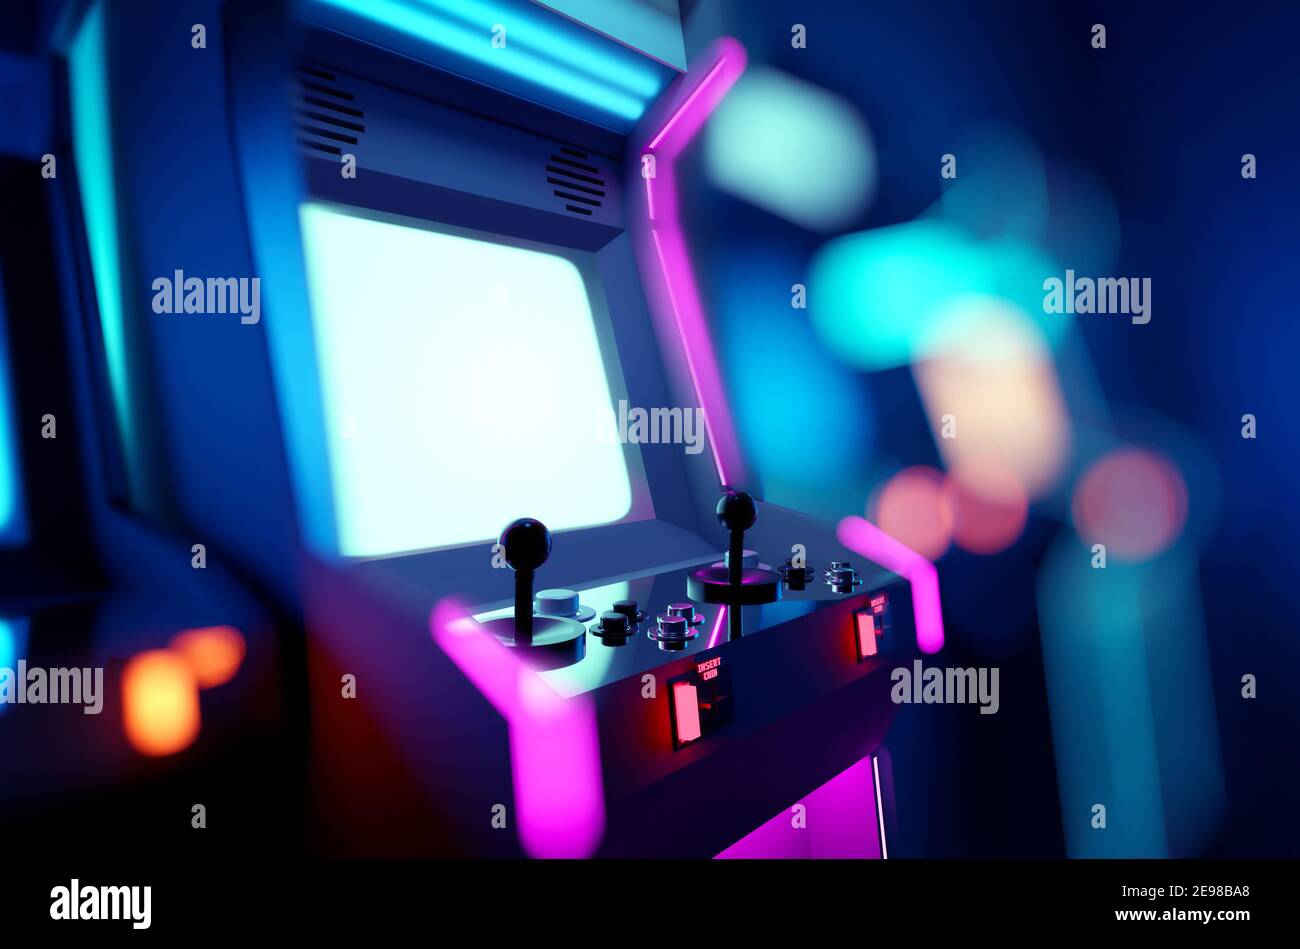 Retro neon glowing arcade machines in a games room. 3D render illustration. Stock Photo